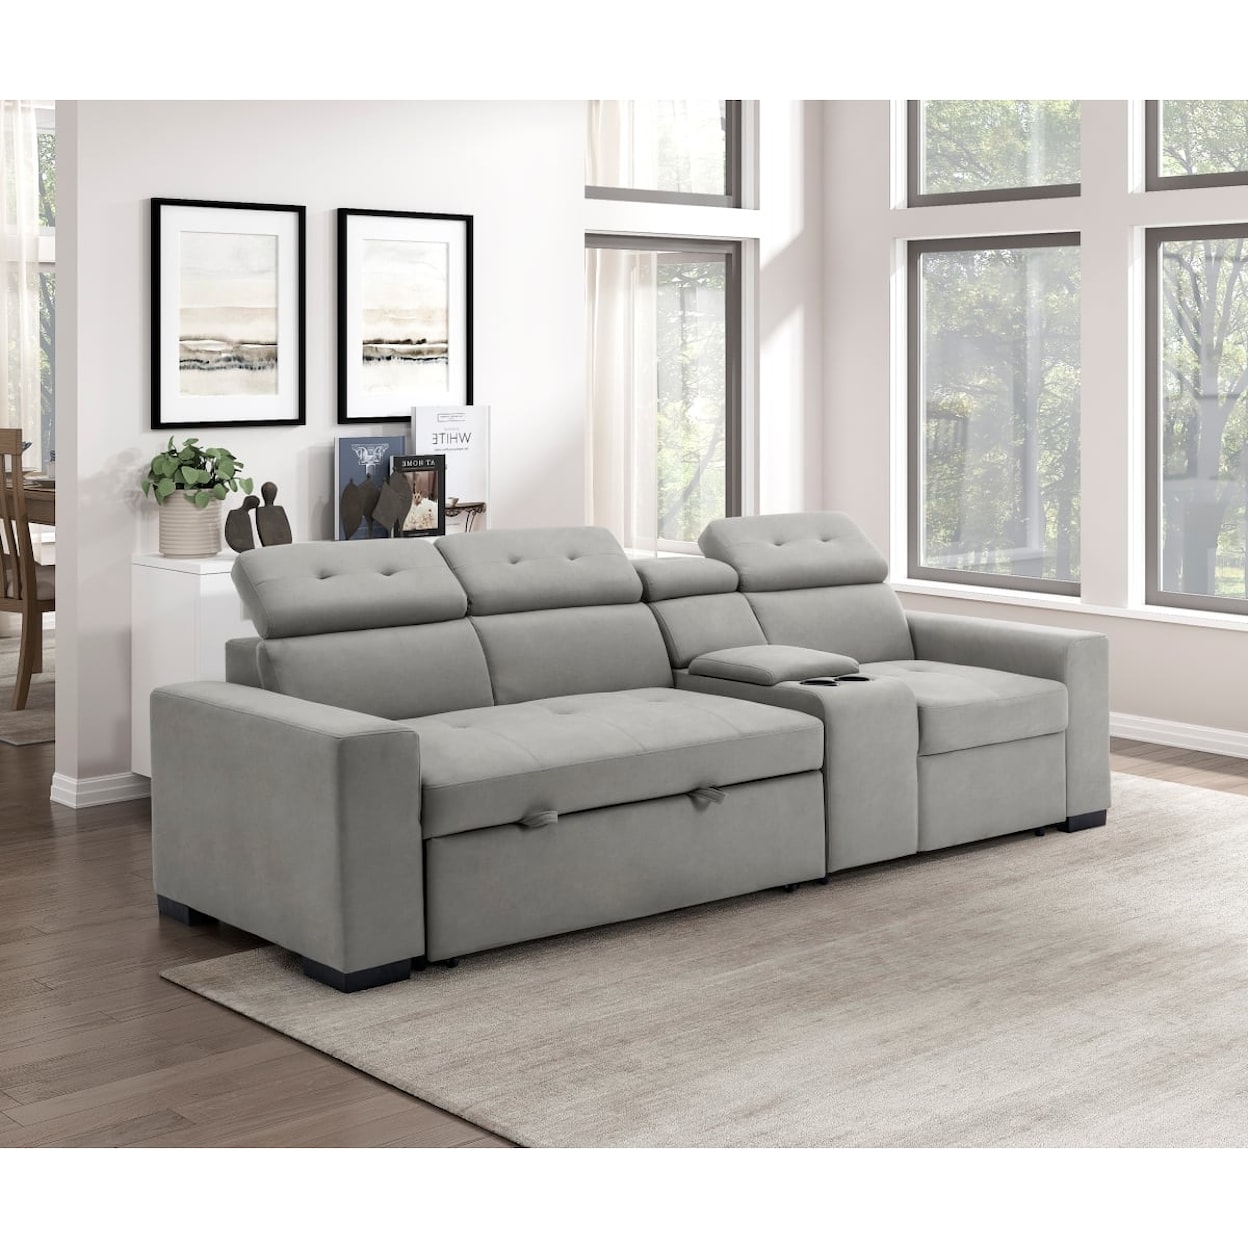 Homelegance Furniture Farrah 2-Piece Sofa with Right Console